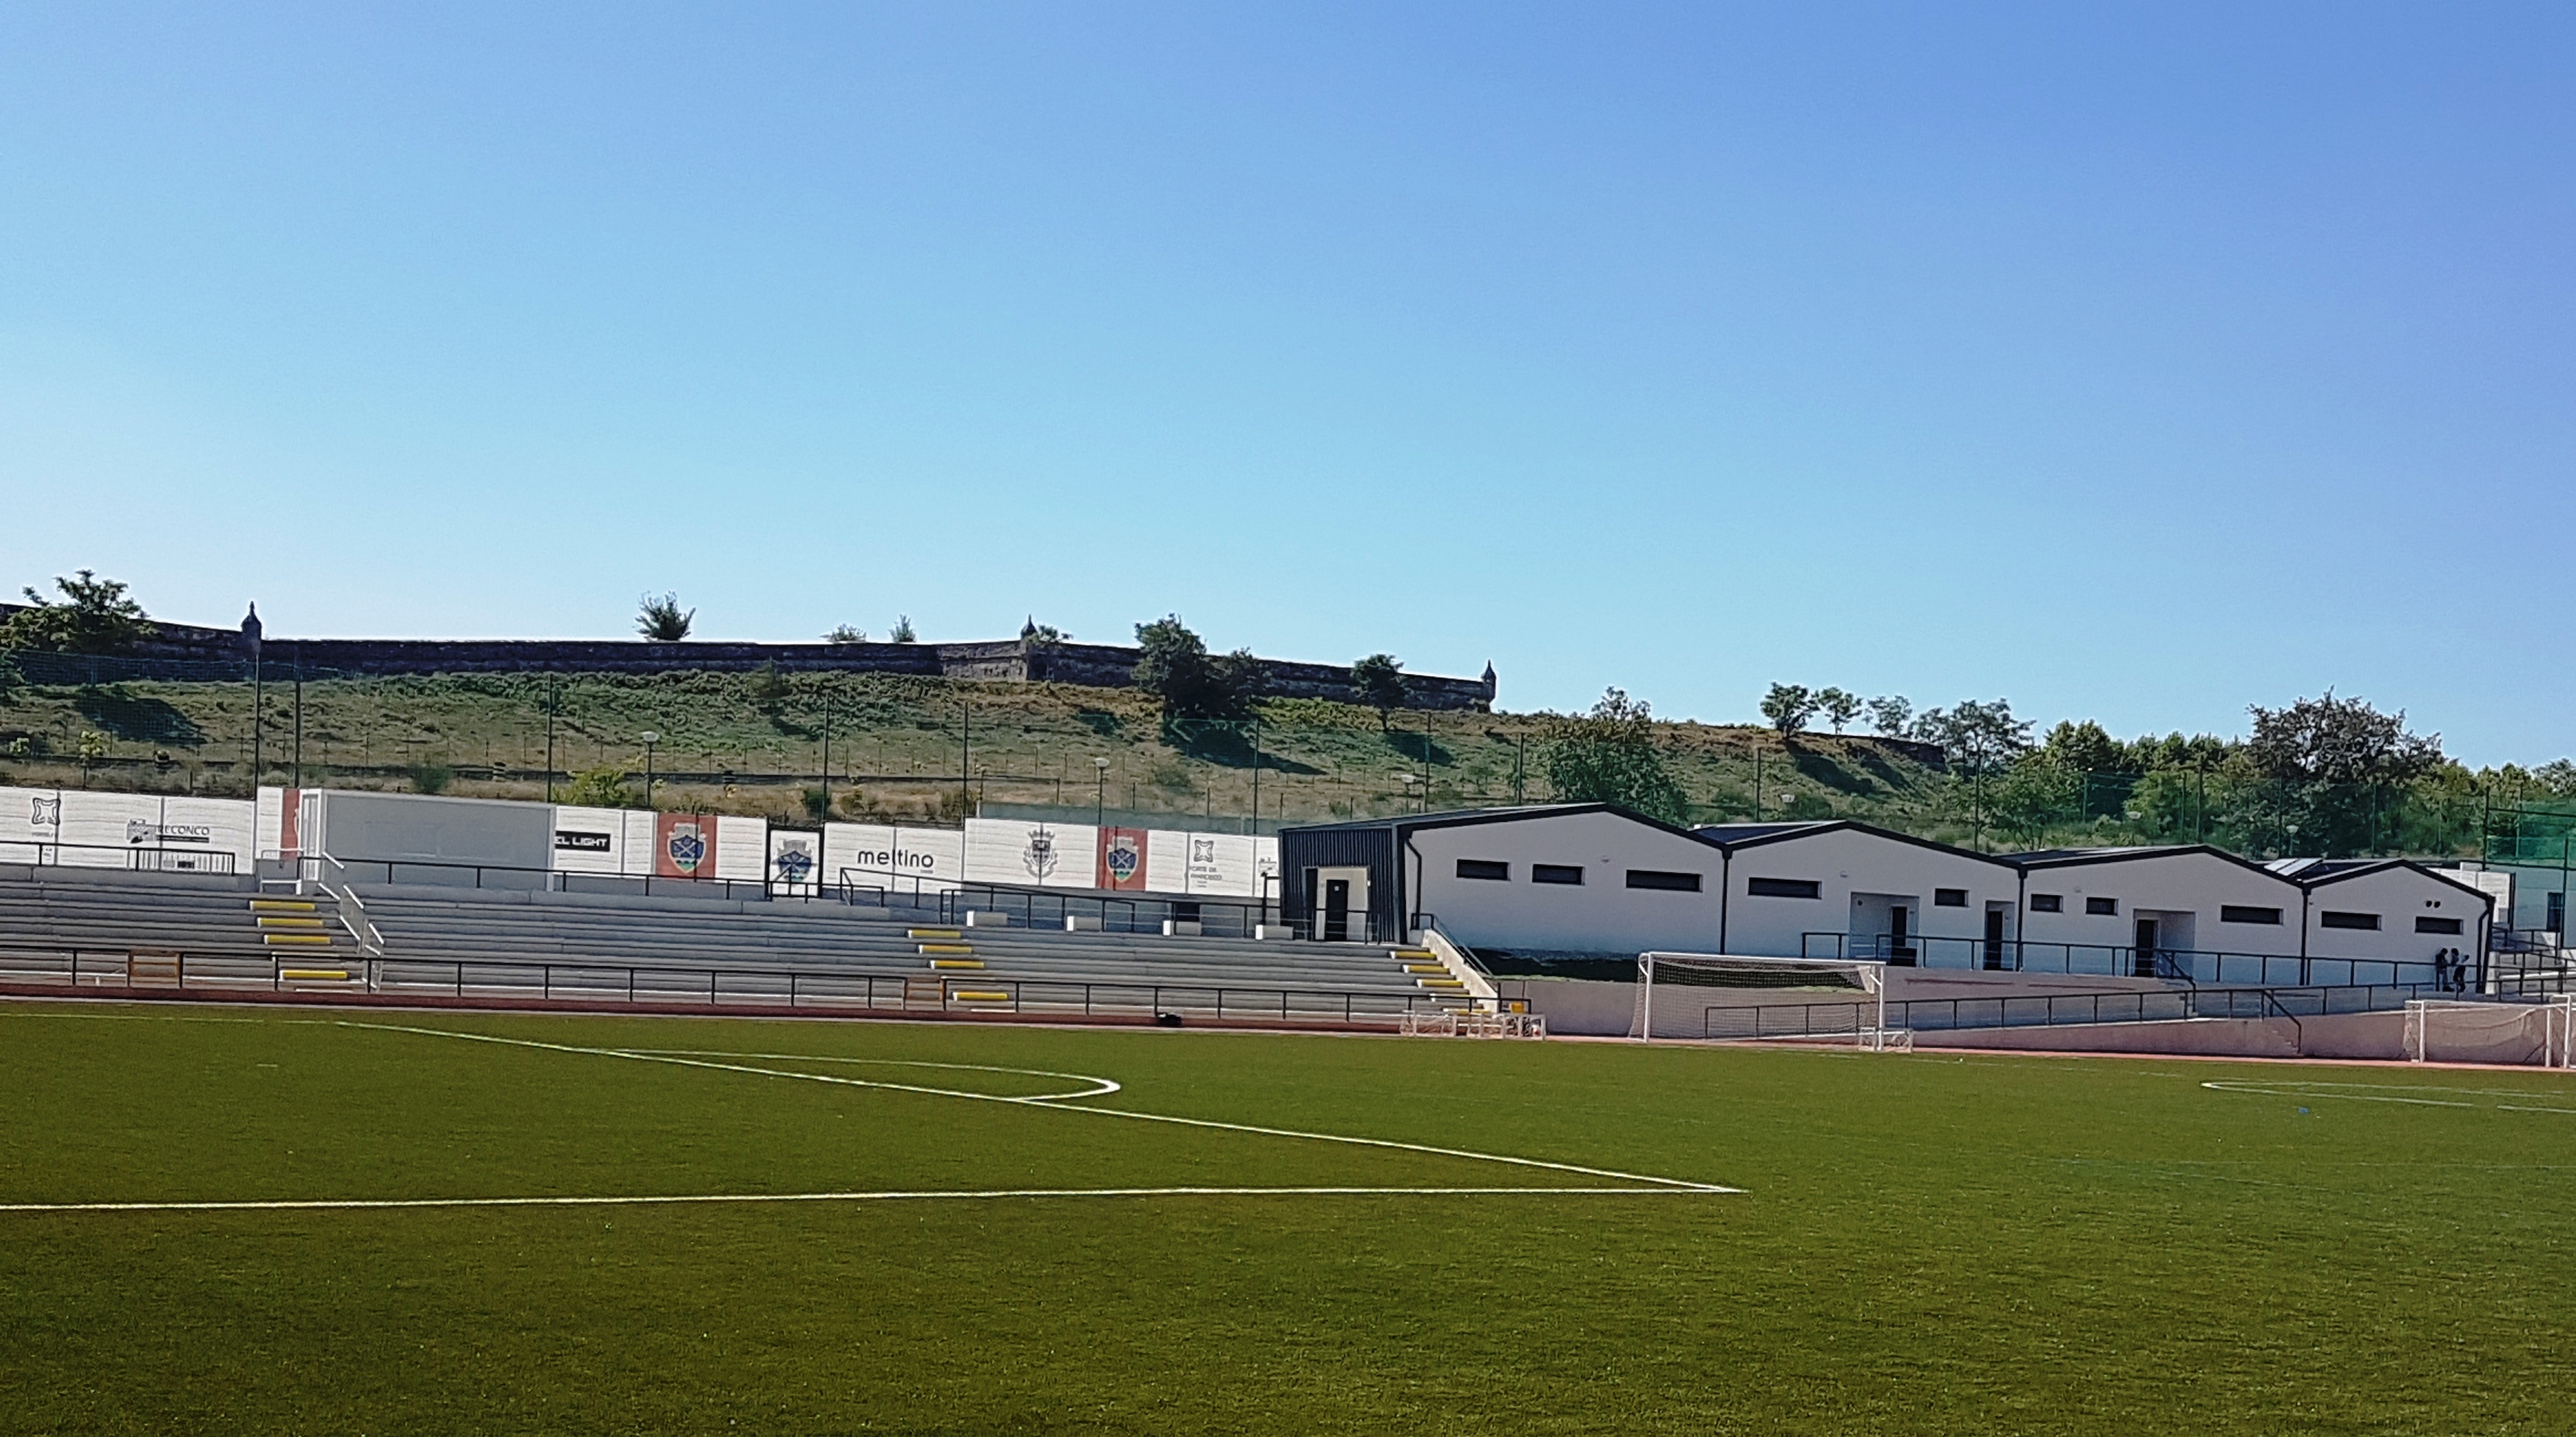 CONSTRUCTION OF THE FRANCISCO CARVALHO SPORTS COMPLEX IN CHAVES